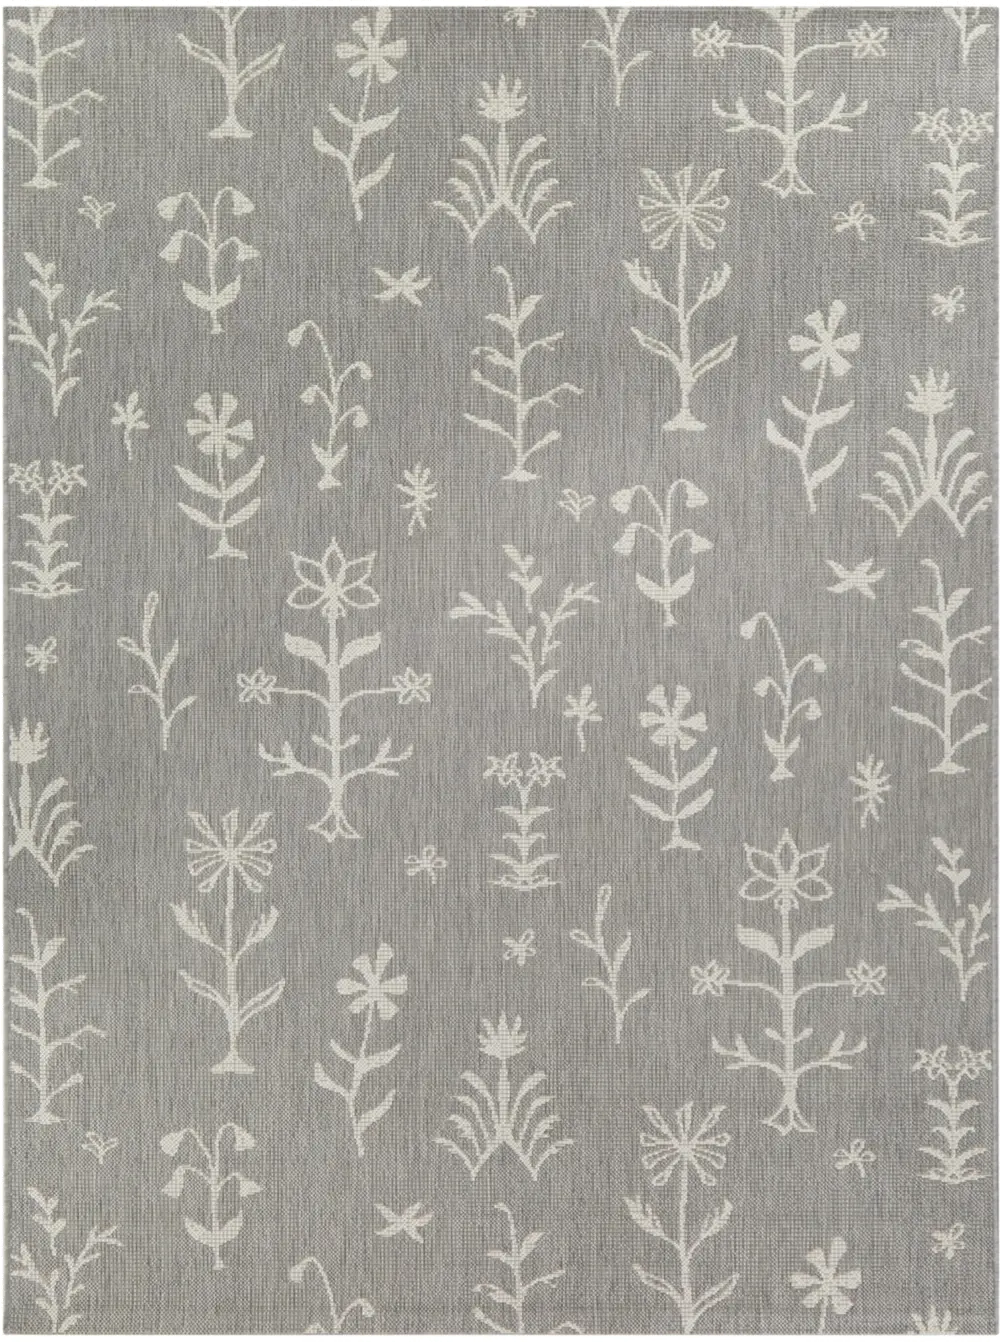 Rosemary 5 x 7 Floral Botanical Outdoor Patio Rug-1